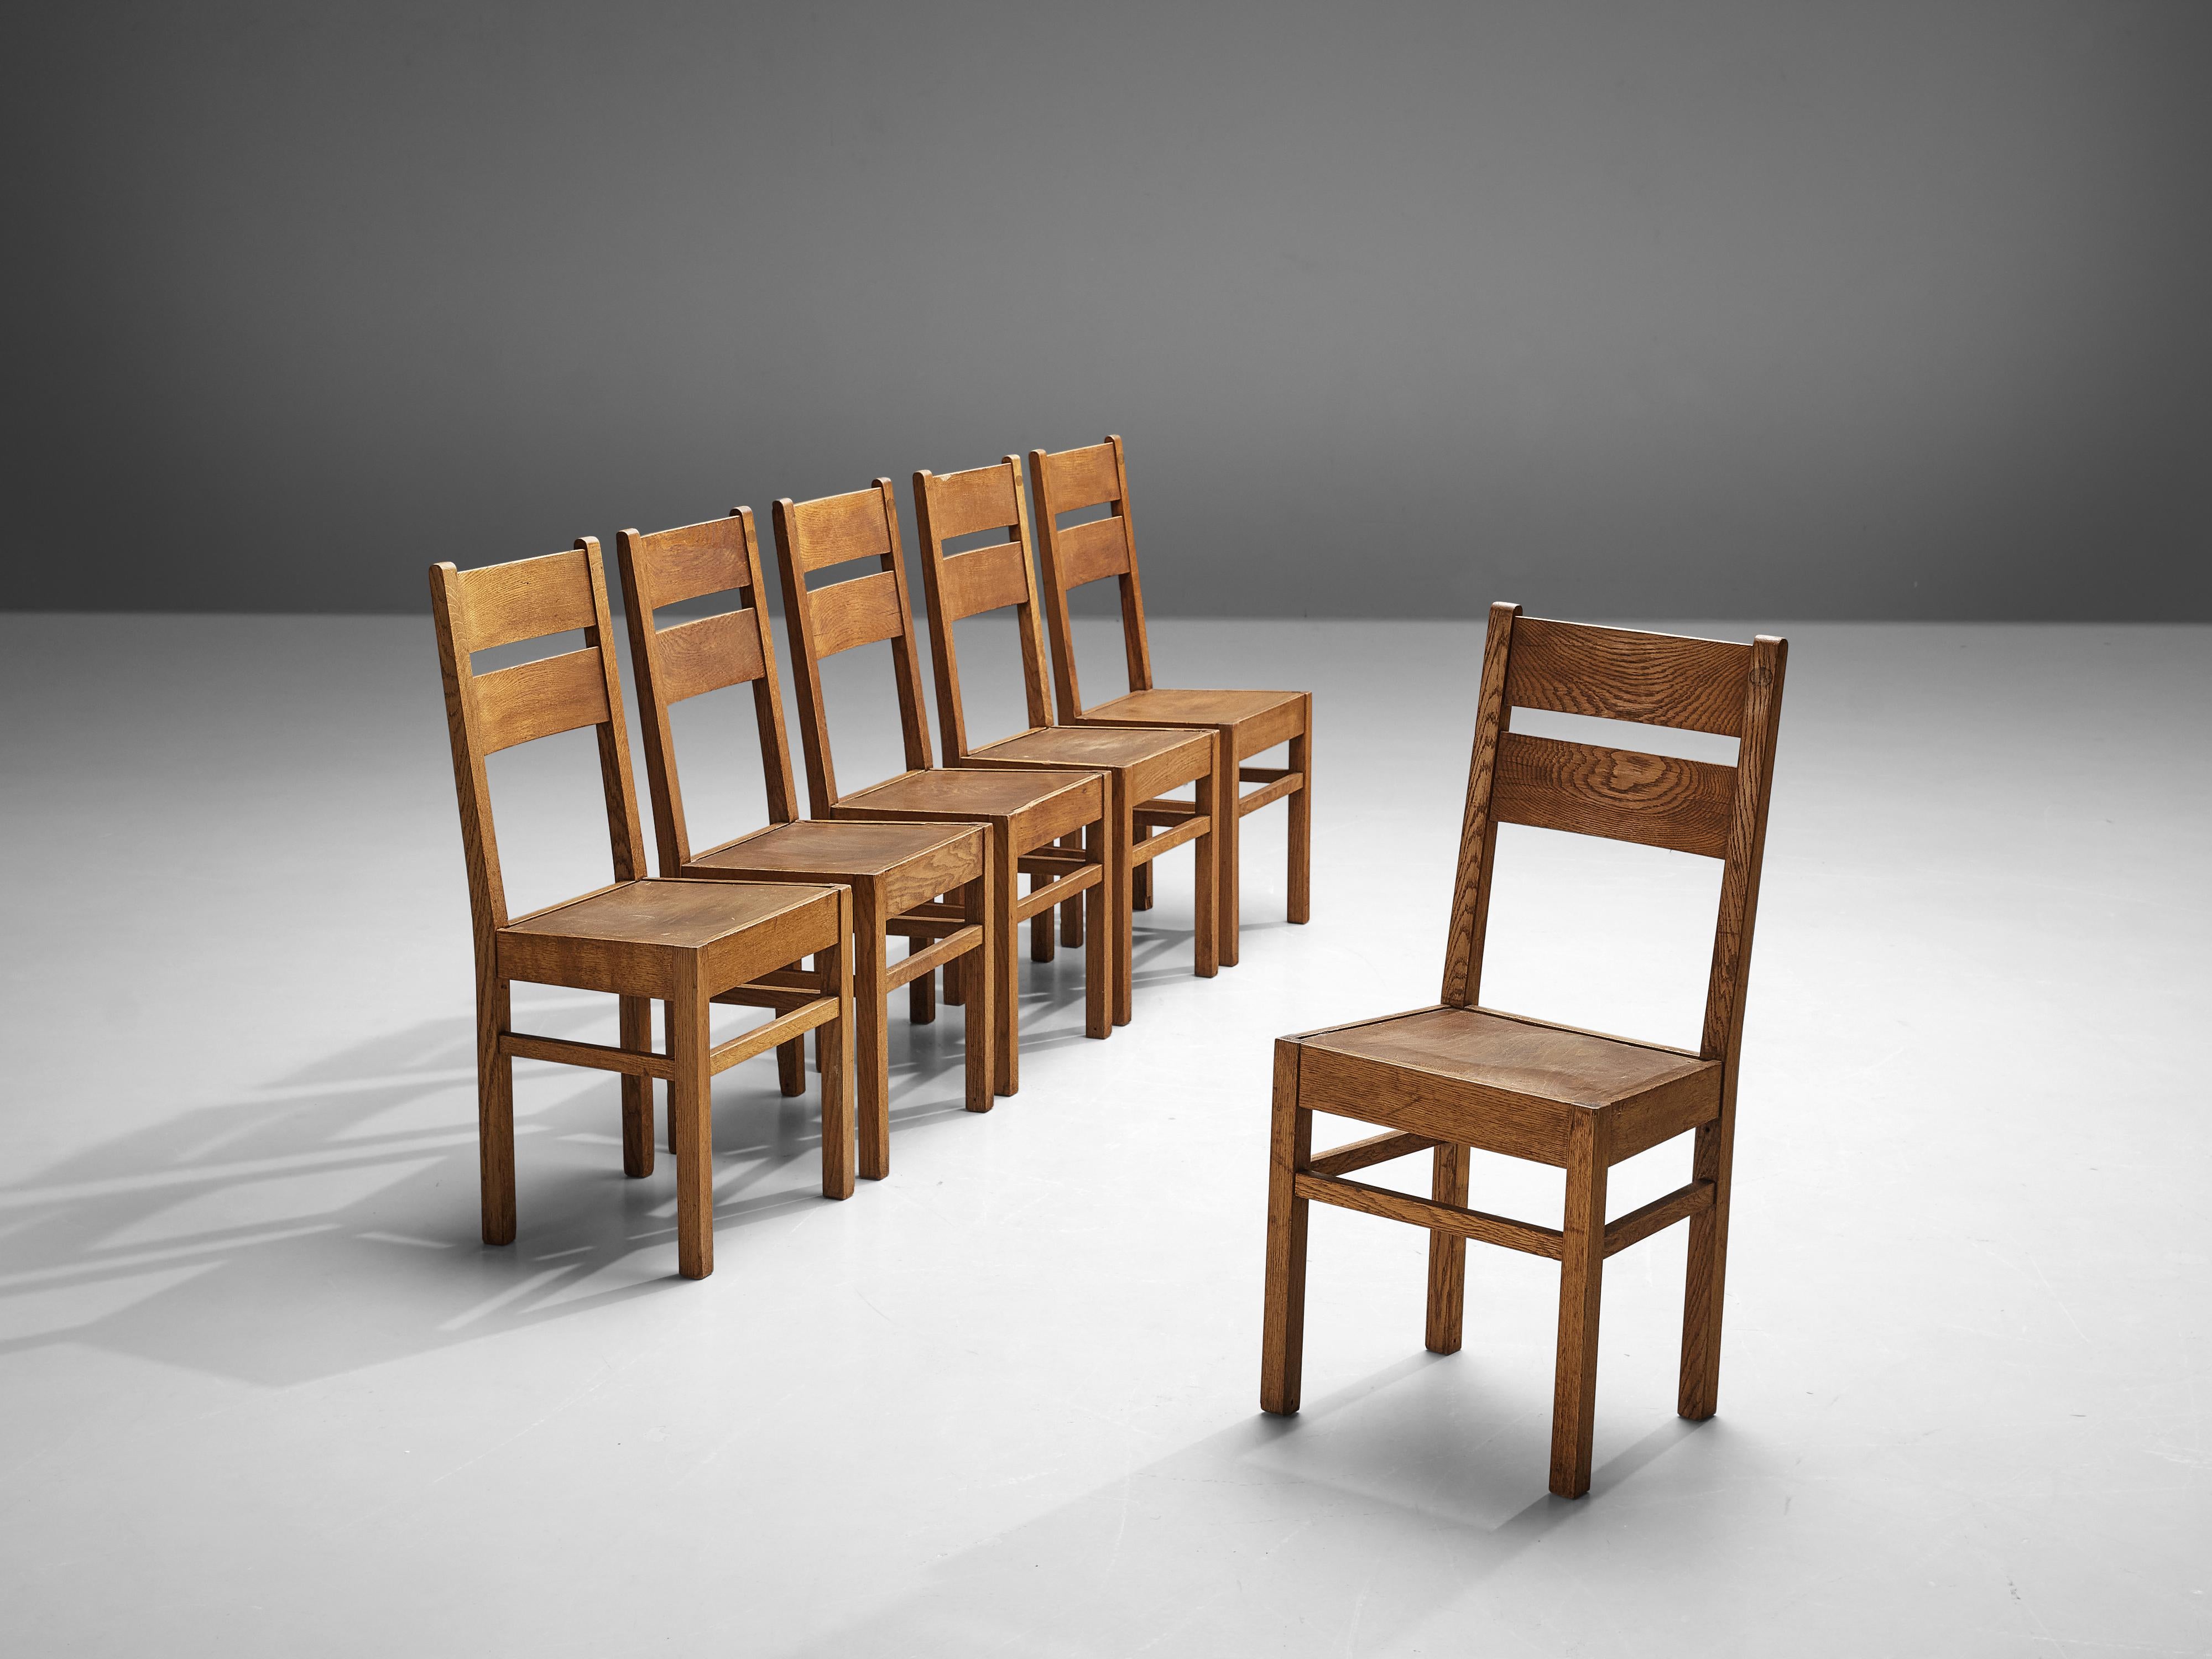 Dining chairs, oak, The Netherlands, 1940s

These dining chairs not only shows a well-balanced backrest and overall frame. The frame is very structured and sturdy which is also visible in the legs. Thanks to the backrest and legs, an open character